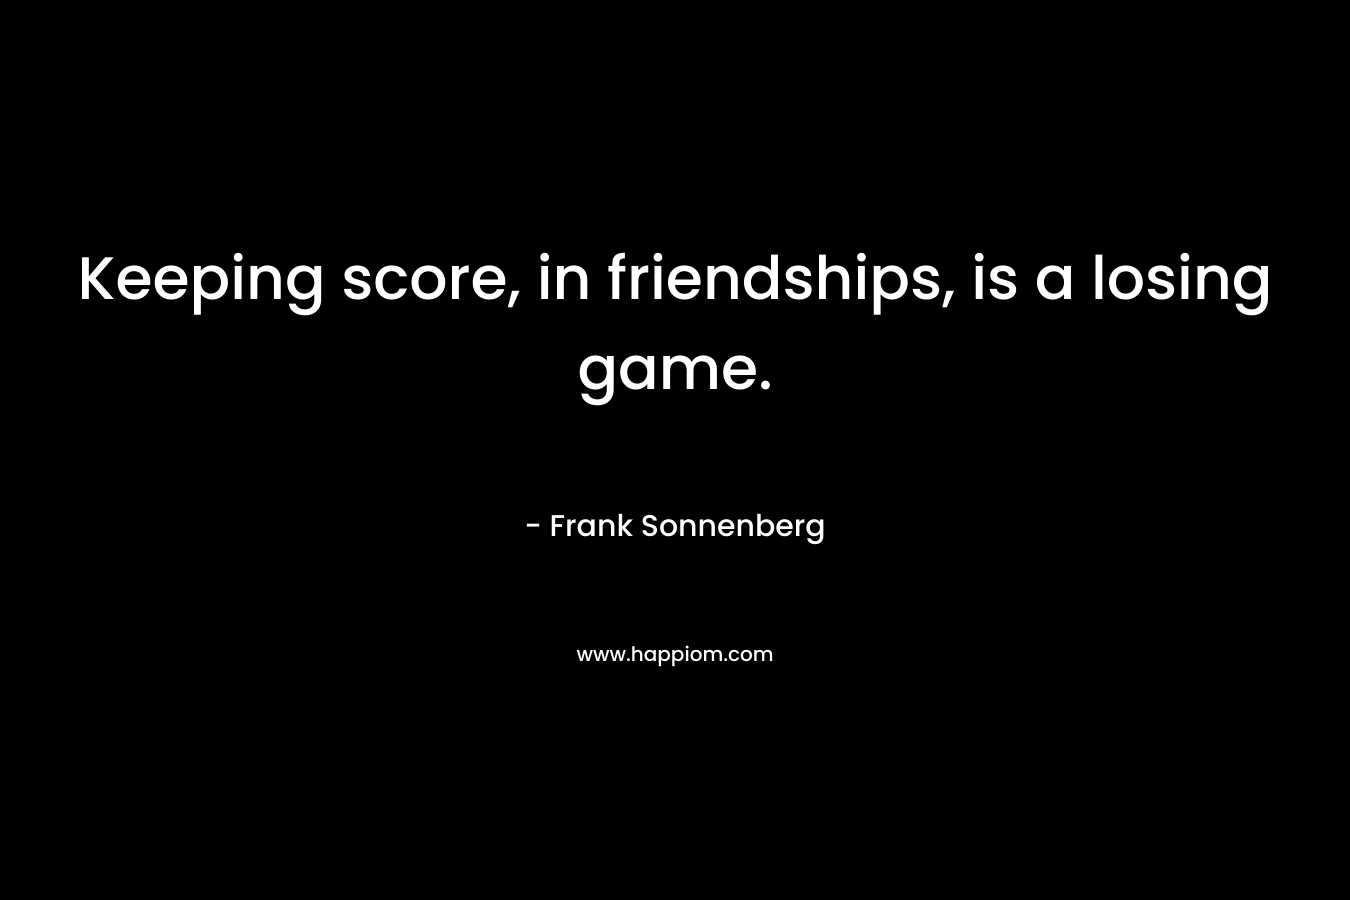 Keeping score, in friendships, is a losing game.